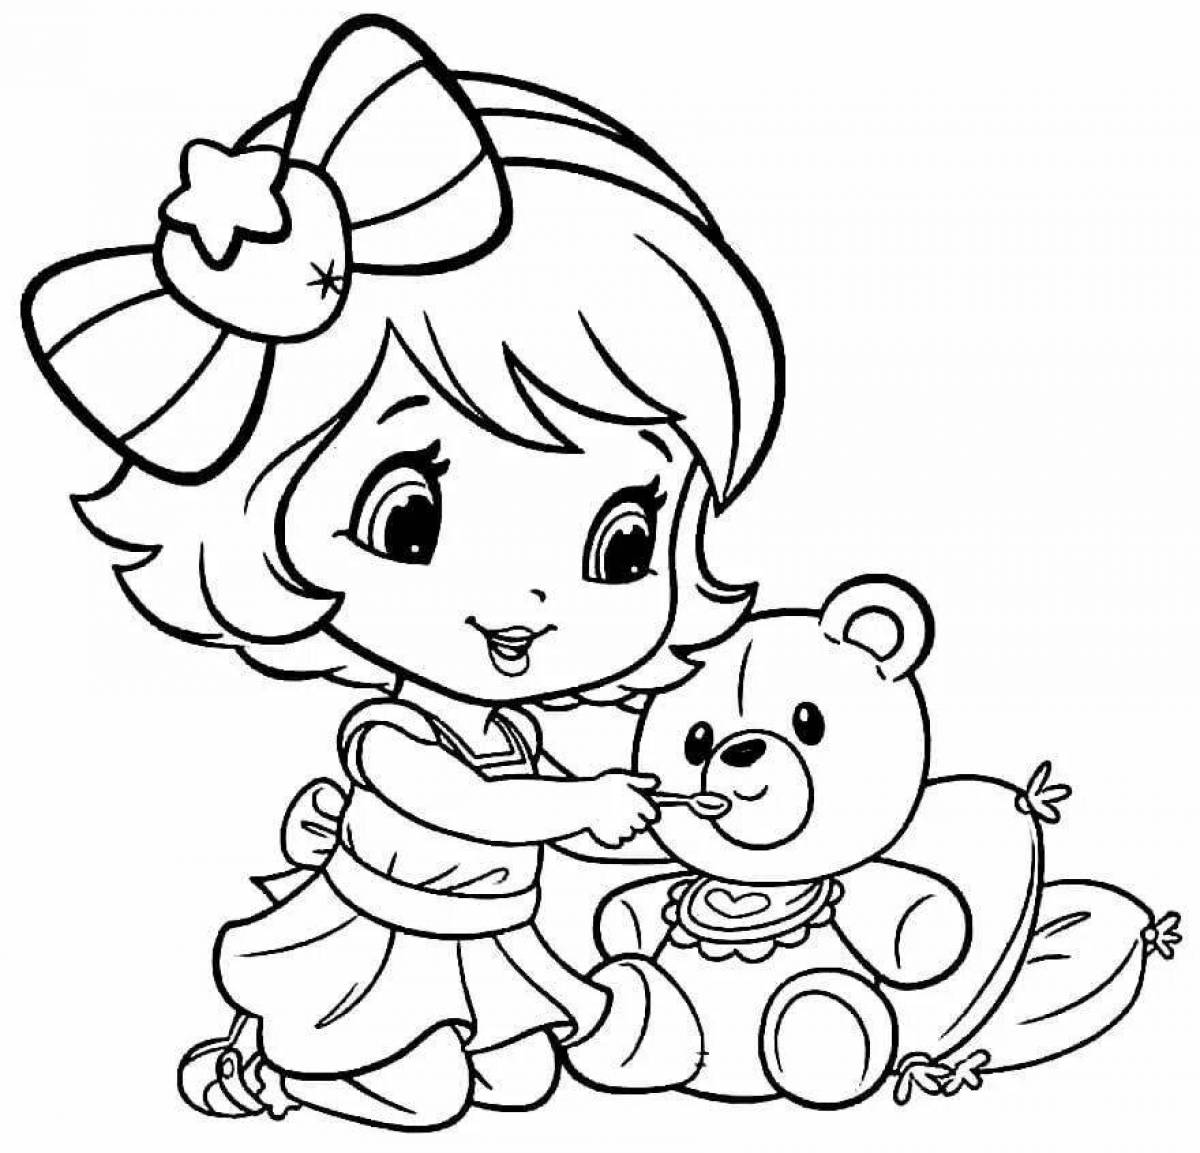 Coloring book for cartoon girls